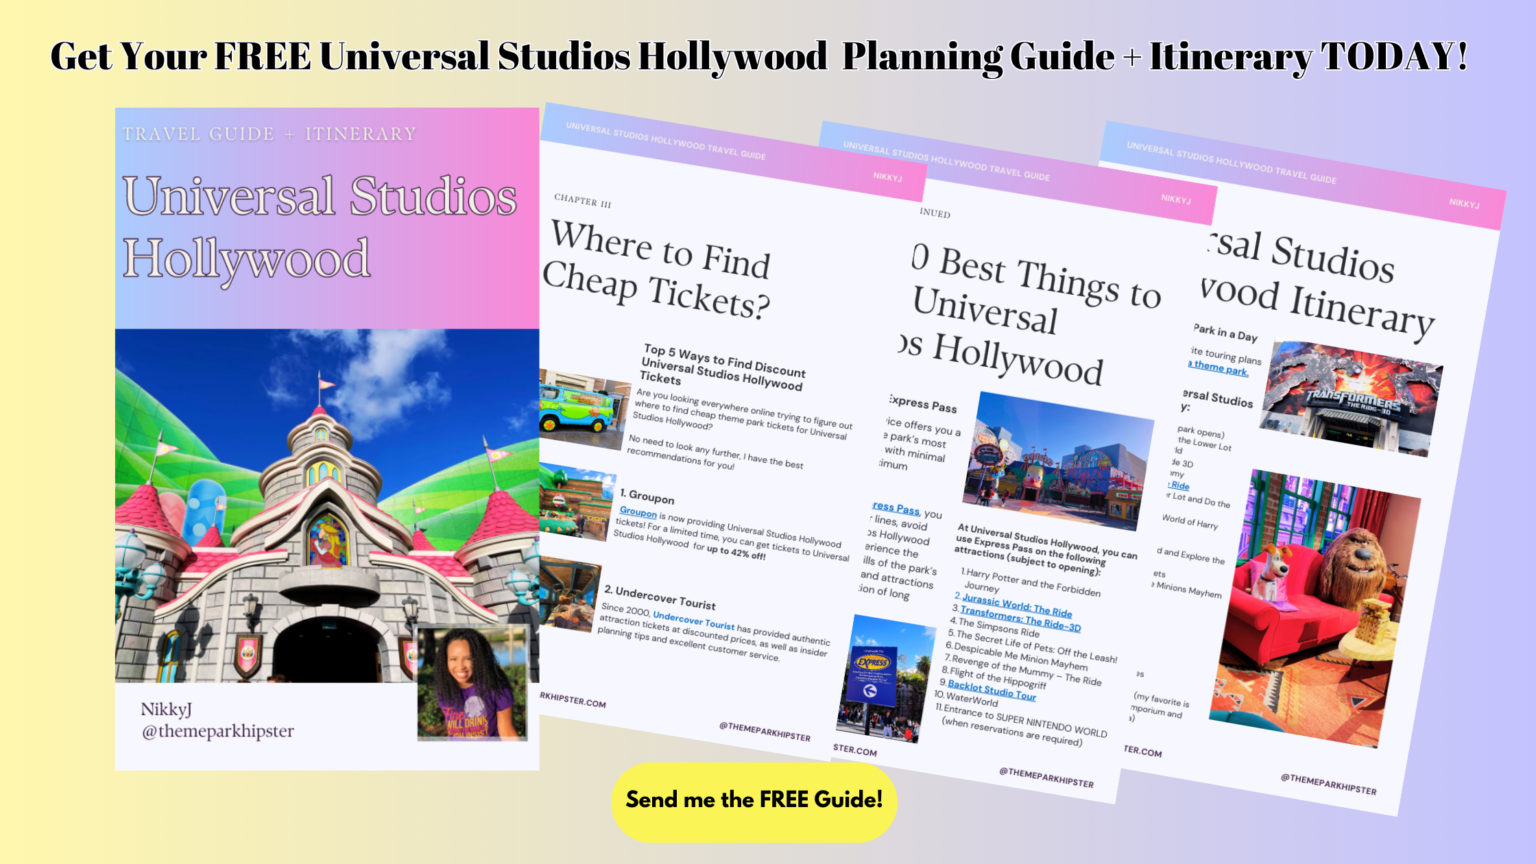 Universal Studios Hollywood Crowd Calendar Your Best Days to Visit in